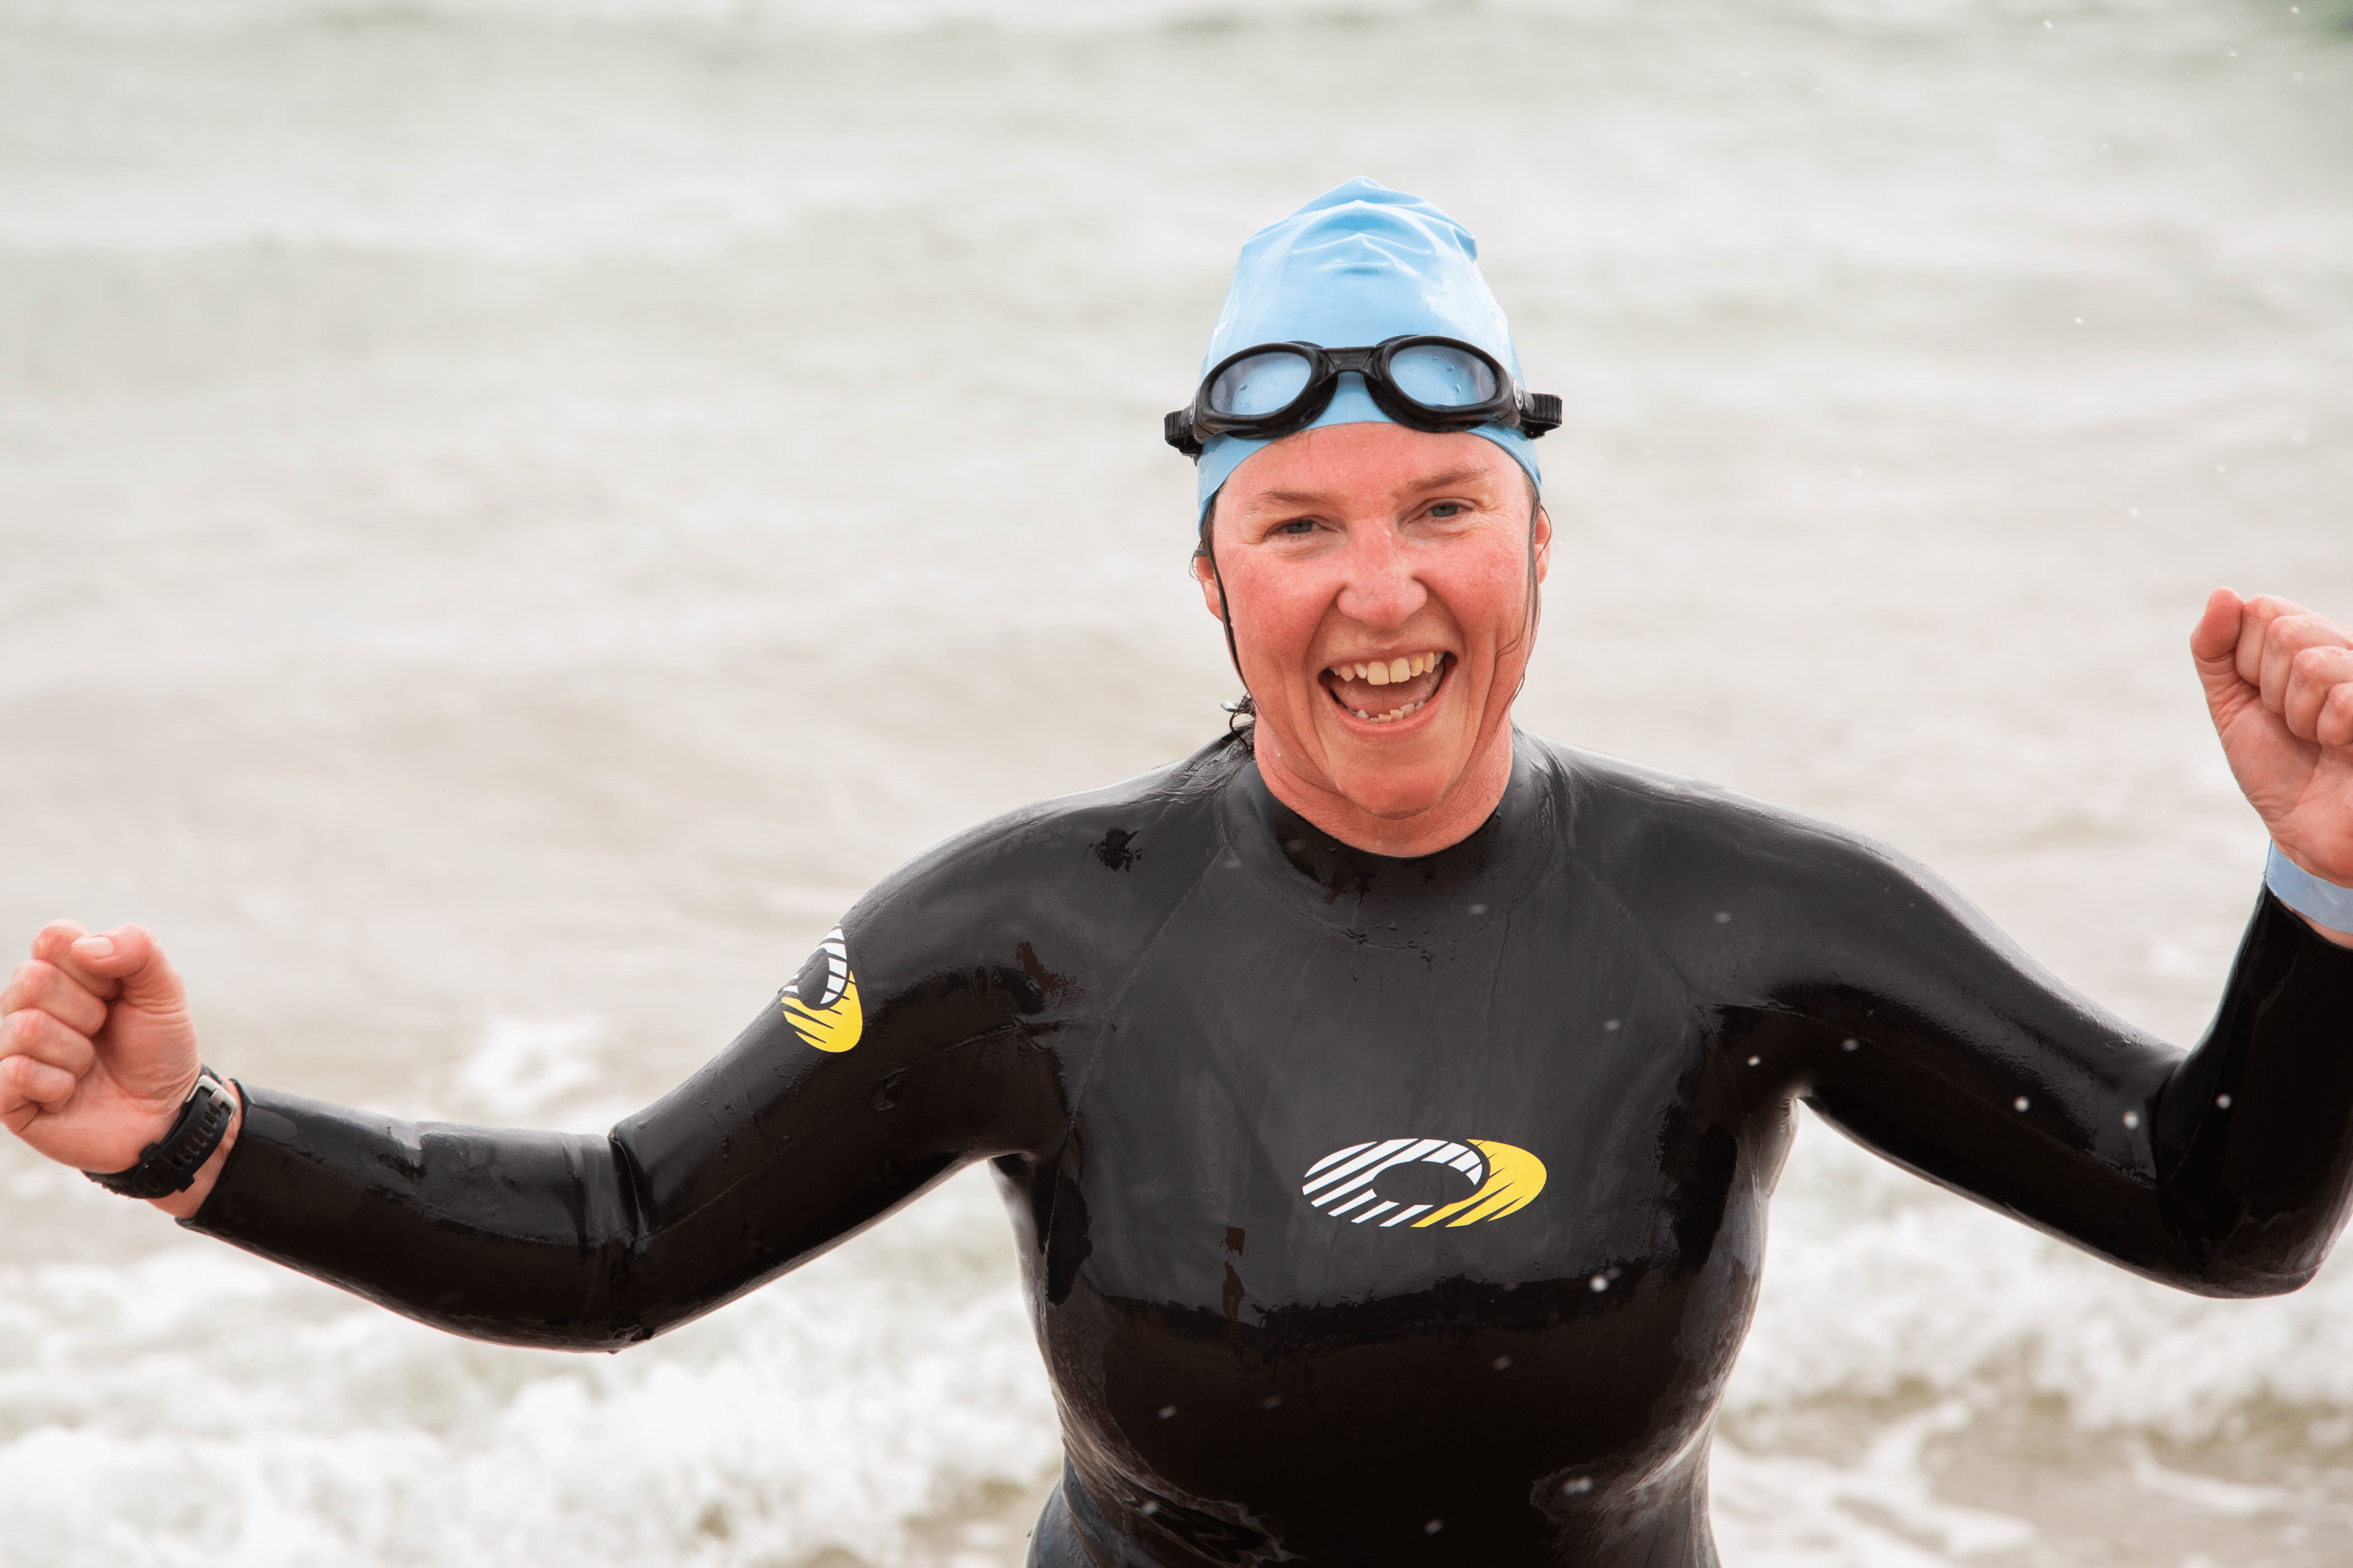 Still Time to Register for the BHF Bournemouth Pier to Pier Swim